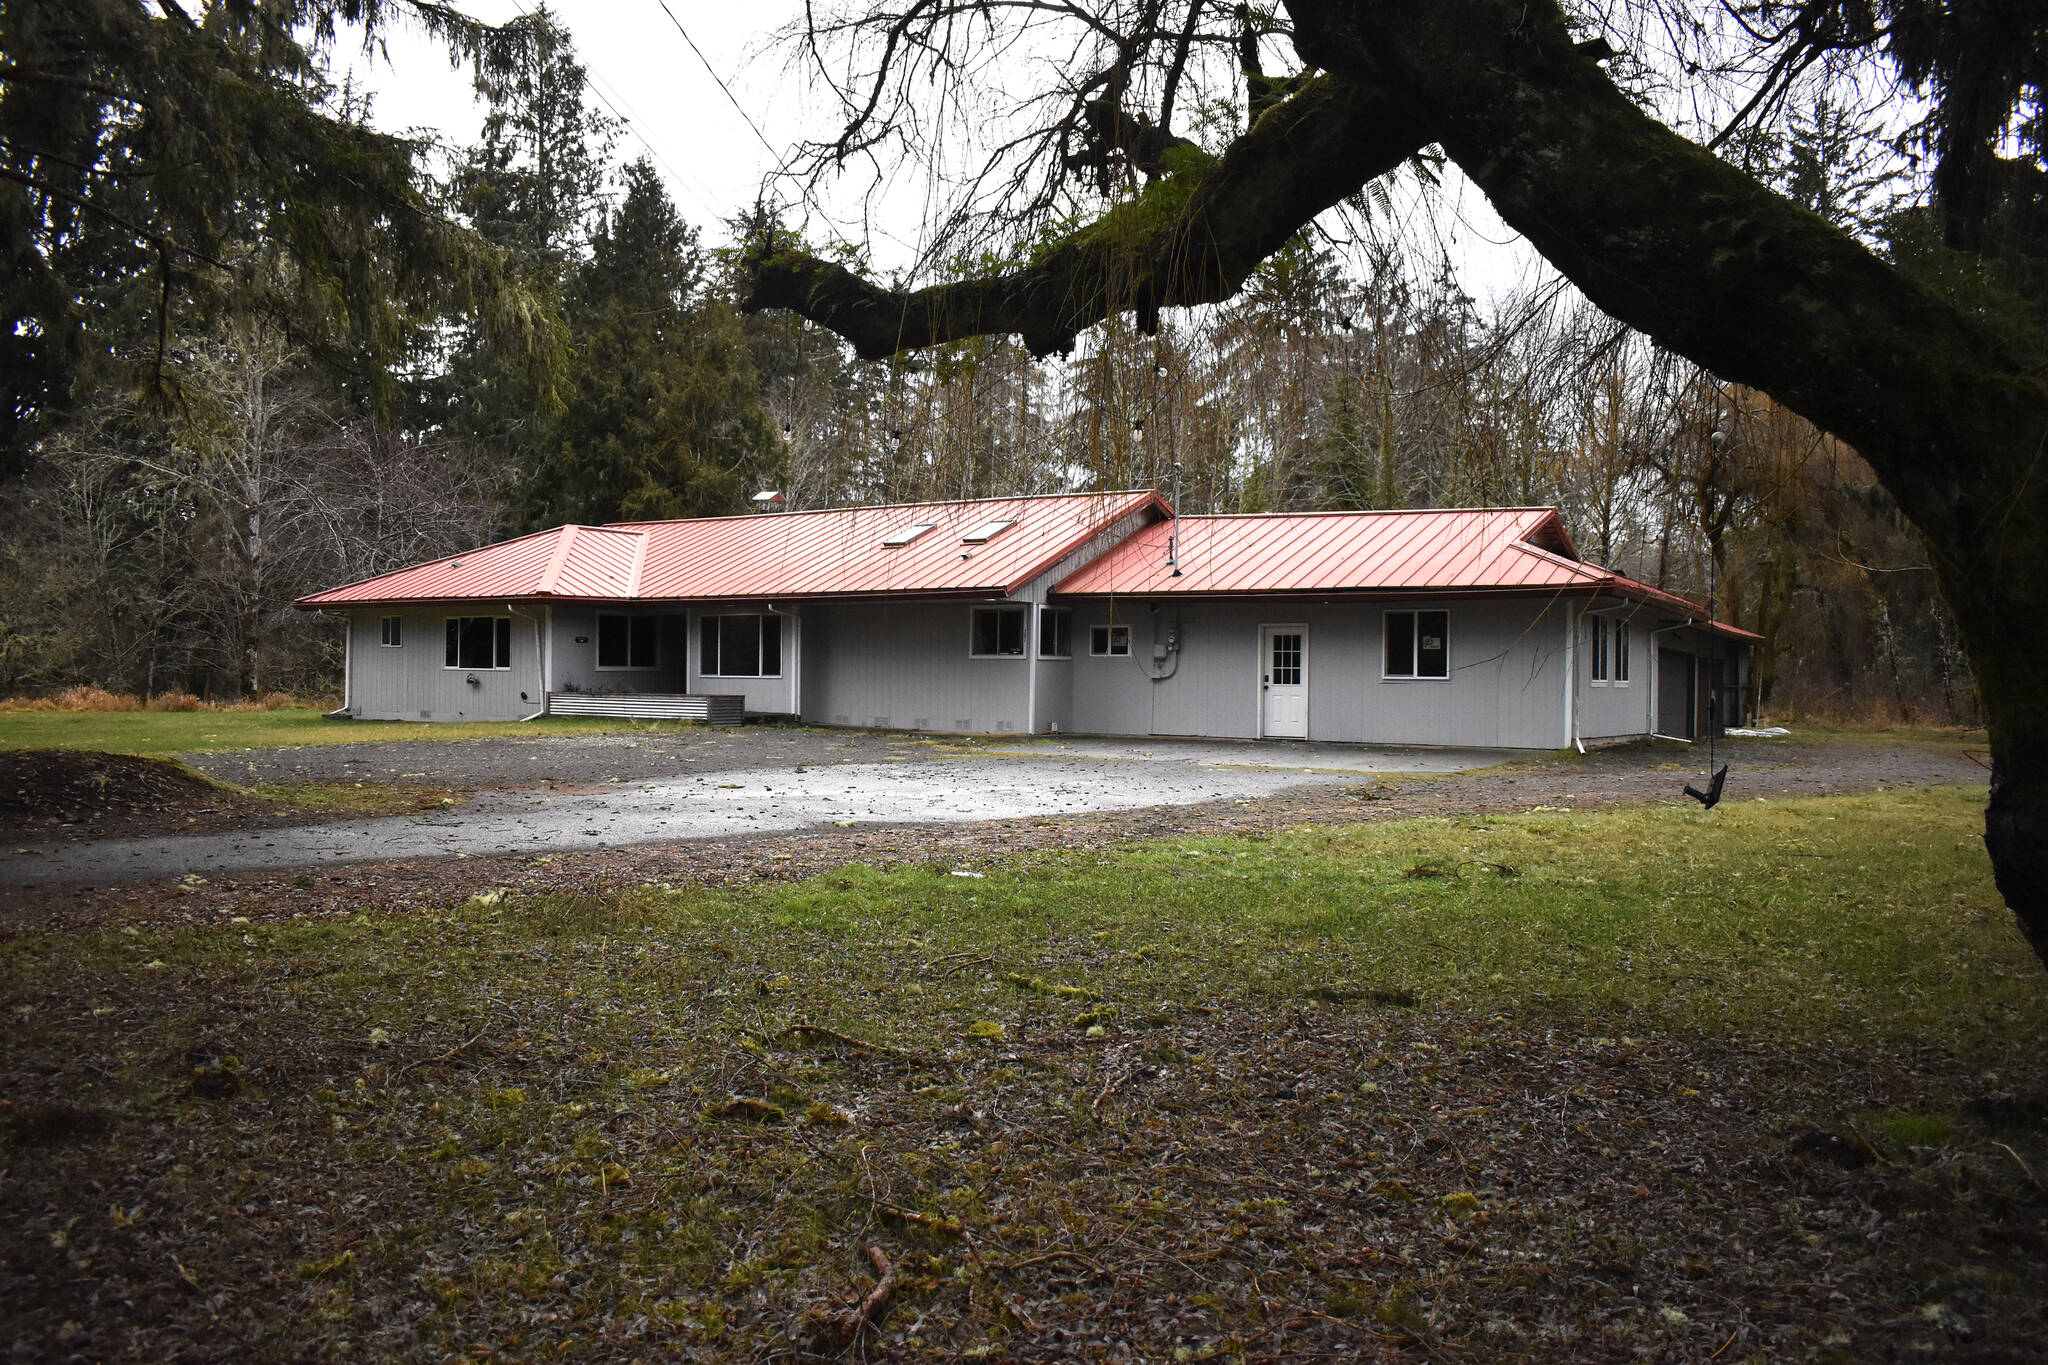 (Matthew N. Wells / The Daily World) A building sits at the address of the proposed site, according to a Board of County Commissioner's agenda, for a "near-Aberdeen" cold weather shelter on State Route 105. County officials and shelter providers terminated efforts to open the shelter, citing logistical issues.